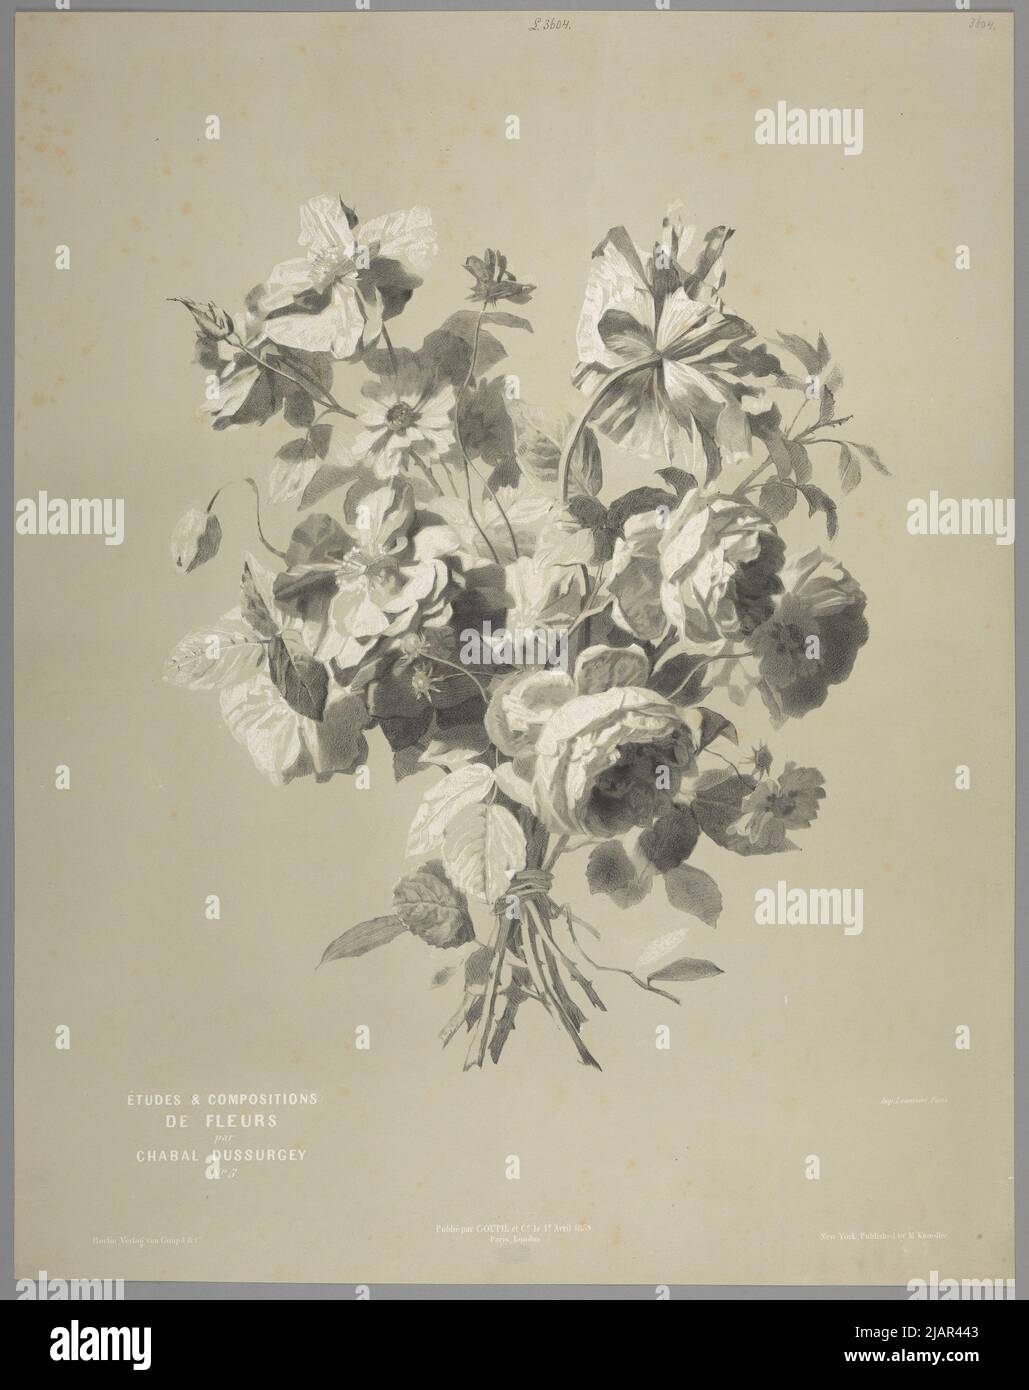 [Bouquet of Roses and Poppies]  Pl. 3. From the series Studies & Flowers compositions by Chabal Dussurgey, Paris London Berlin New York, 1859/1865, lit. Lemercier & Cie, ed. Goupil & Cie Chabal Dussurgey, Pierre Adrien (1819 1902), W A C. Pierre Adrien Chabal, imp. Lemercier & Cie, Goupil & Cie, Knoedler, Michael (1823 1878) Stock Photo